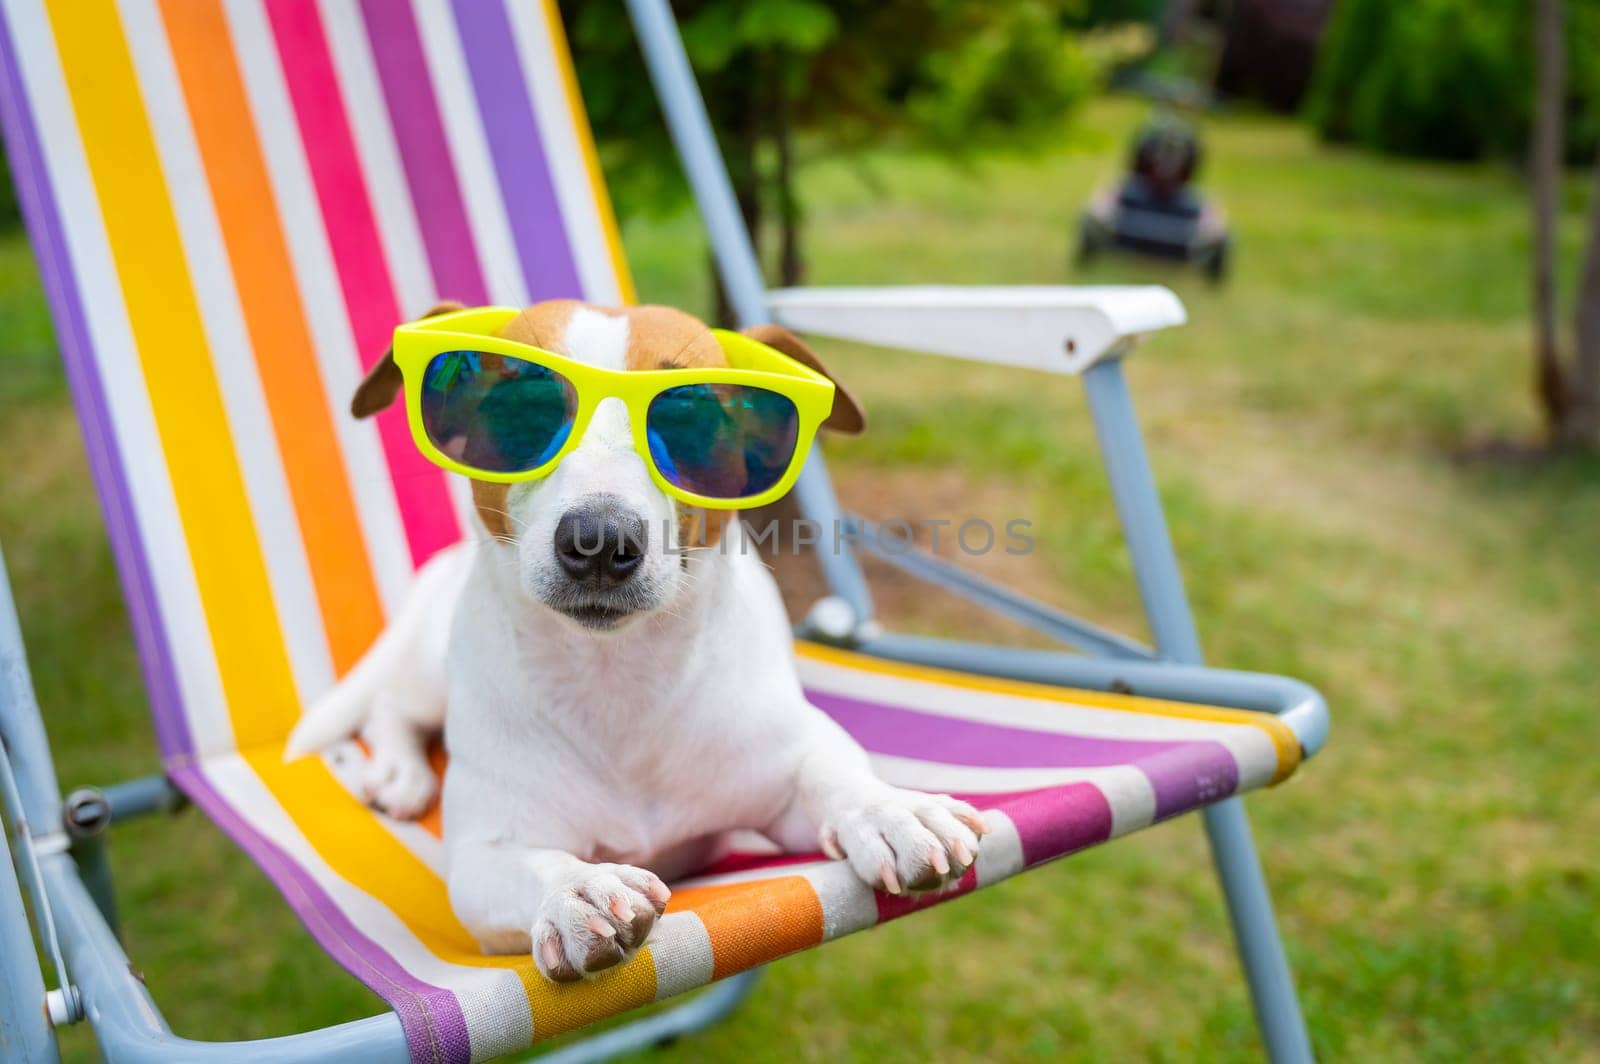 Jack russell terrier dog in sunglasses is resting on a sun lounger. Summer vacation concept. by mrwed54